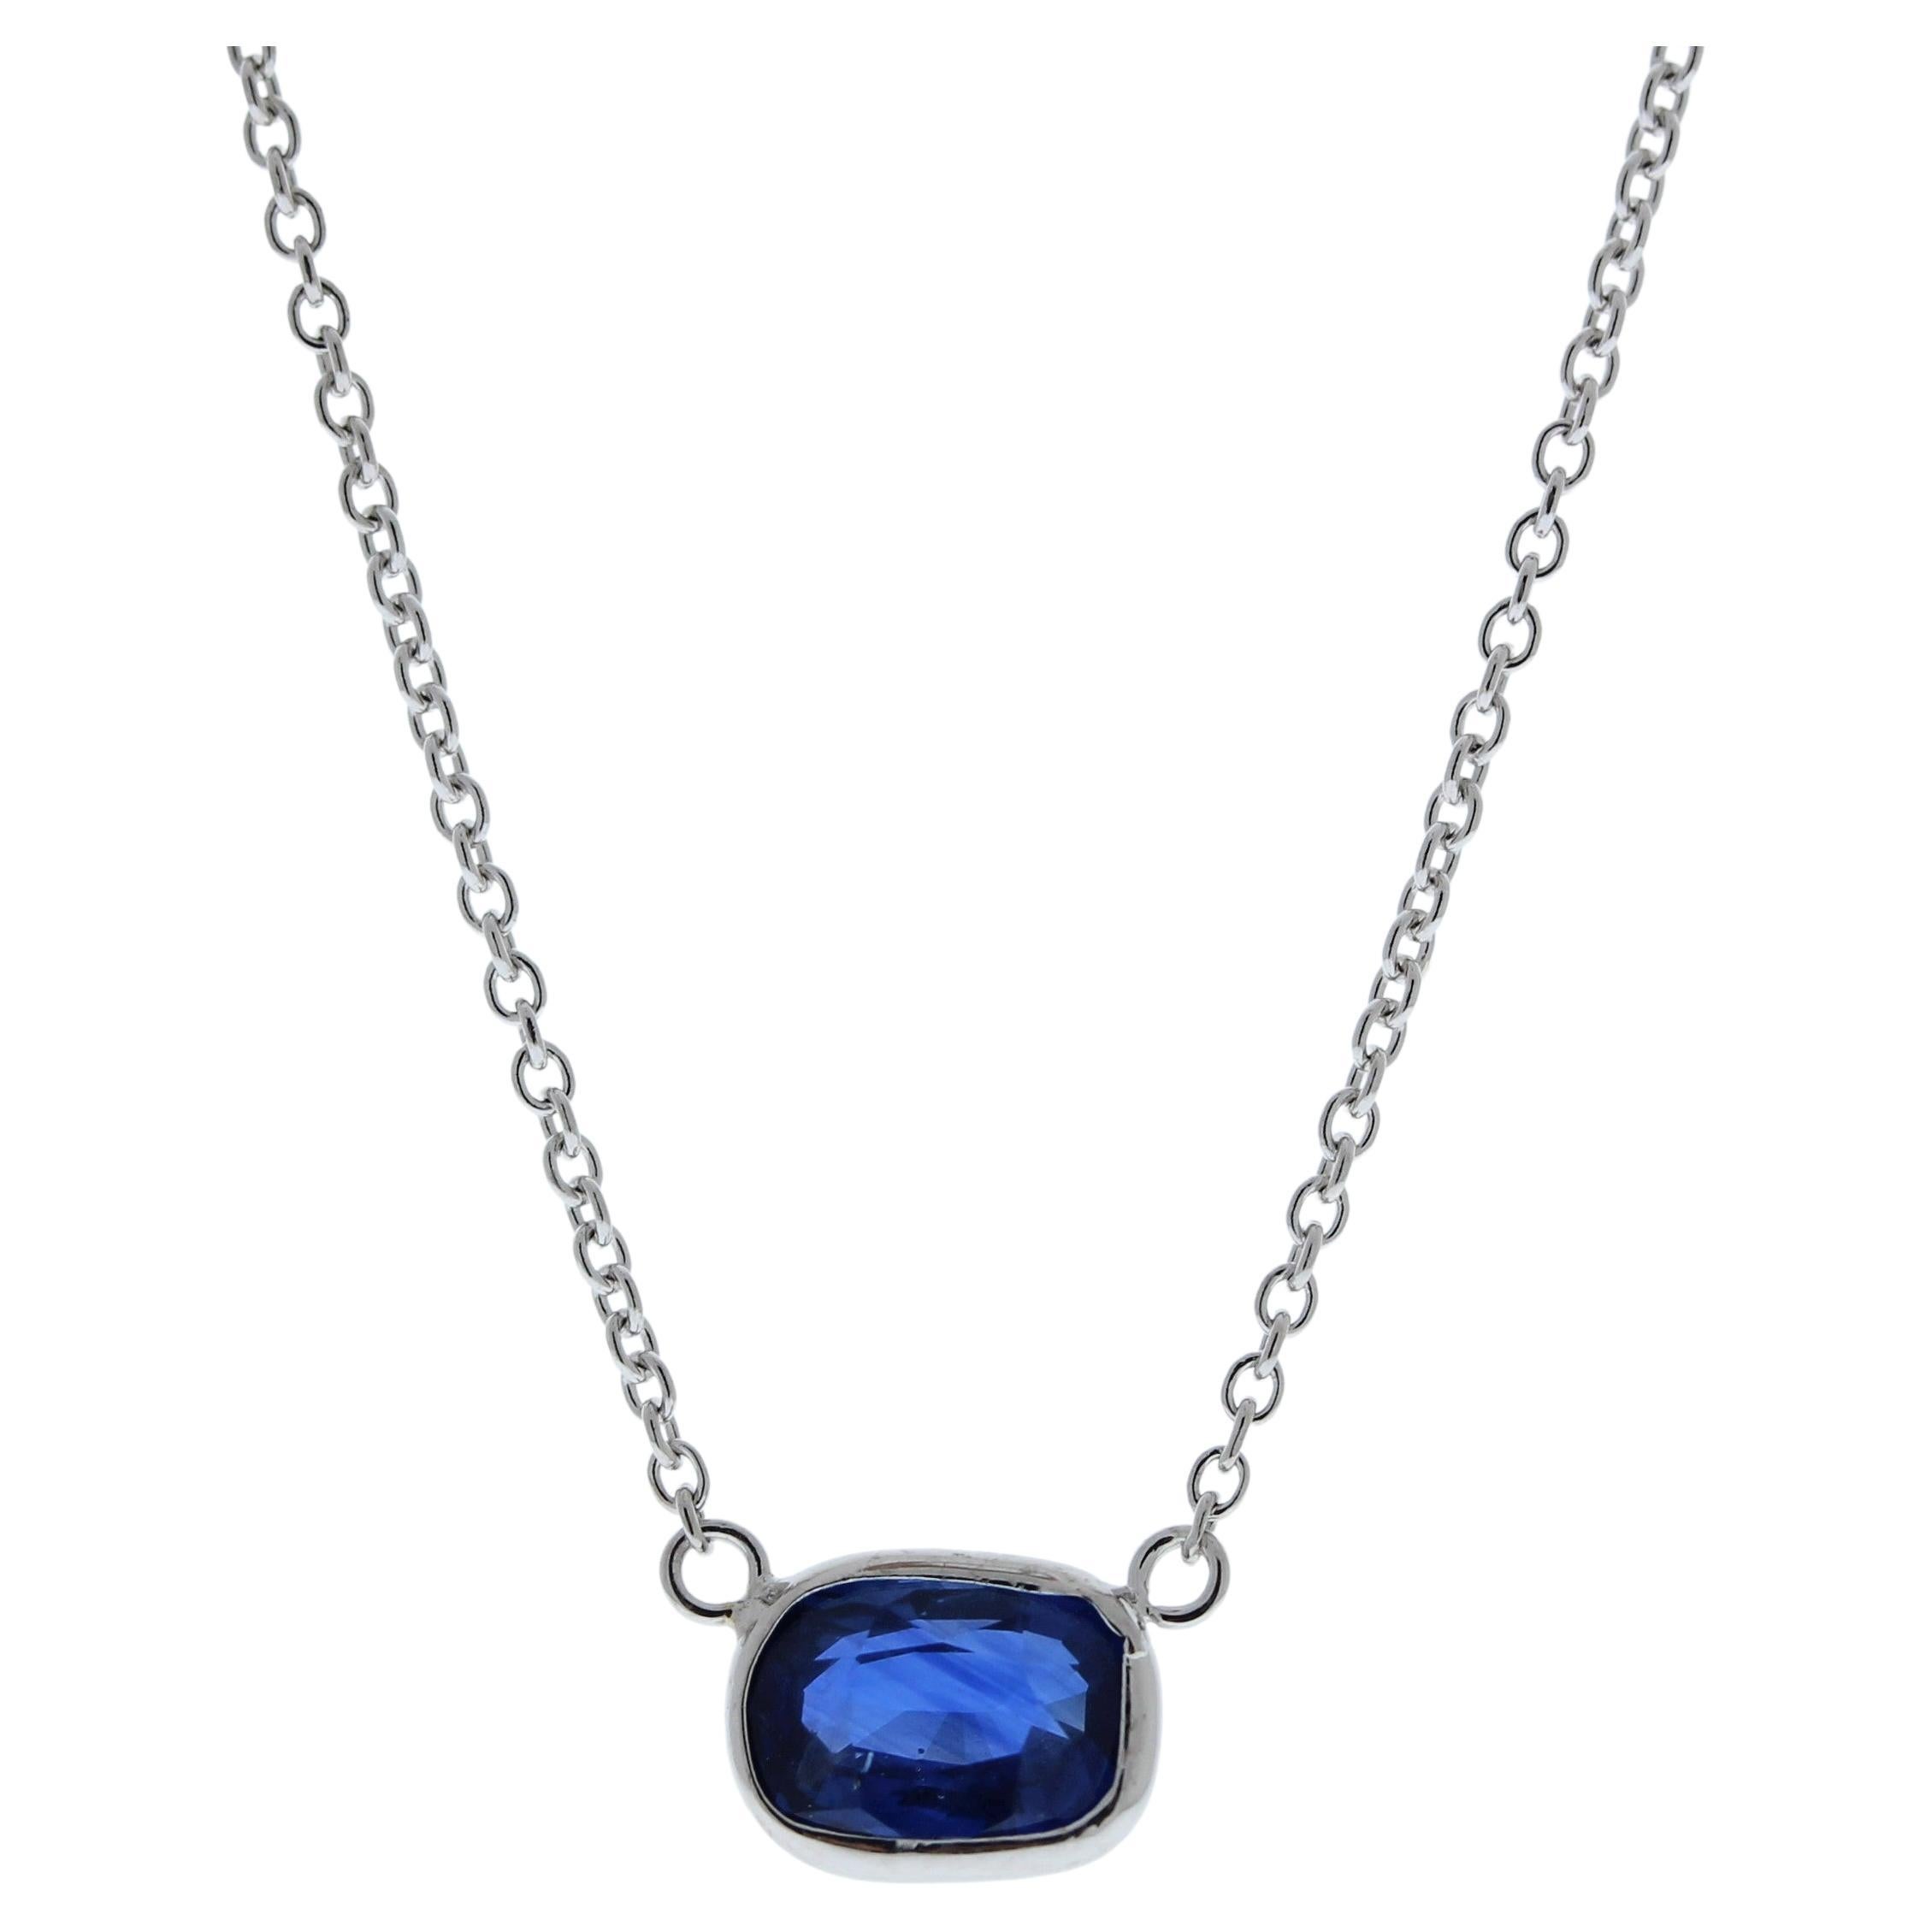 1.56 Carat Cushion Sapphire Blue Fashion Necklaces In 14k White Gold For Sale